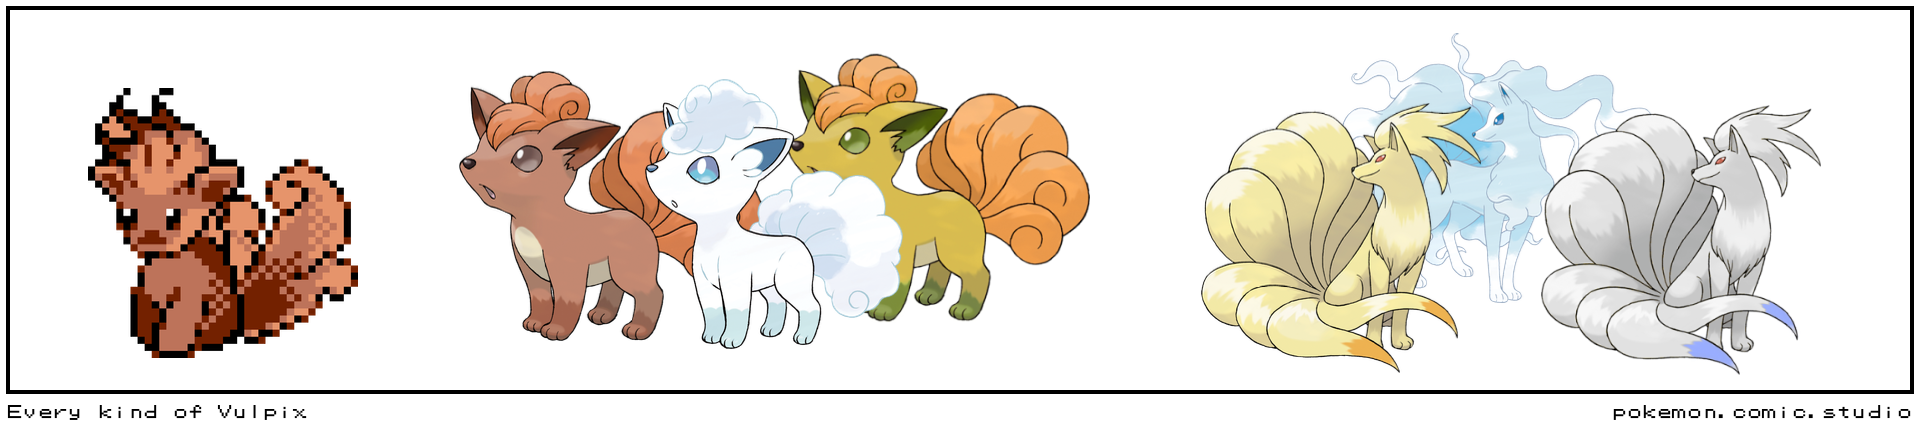 Every kind of Vulpix